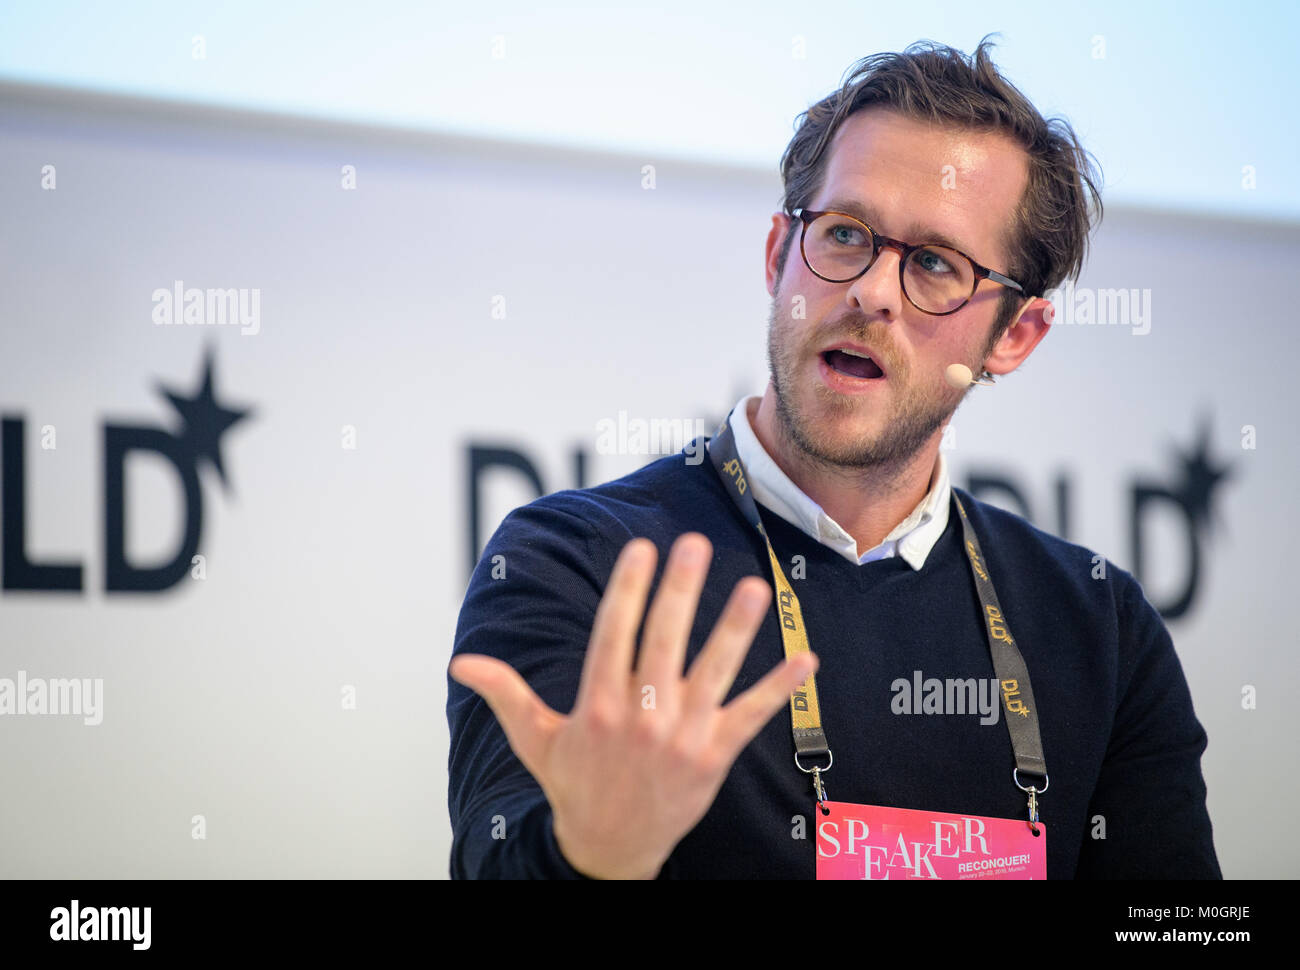 Munich, Germany. 22nd Jan, 2018. Robert Gentz, co-founder of Zalando,  speaks at the innovation conference Digital-Life-Design (DLD) in Munich,  Germany, 22 January 2018. The three-day conference aims to attract  technological, political and